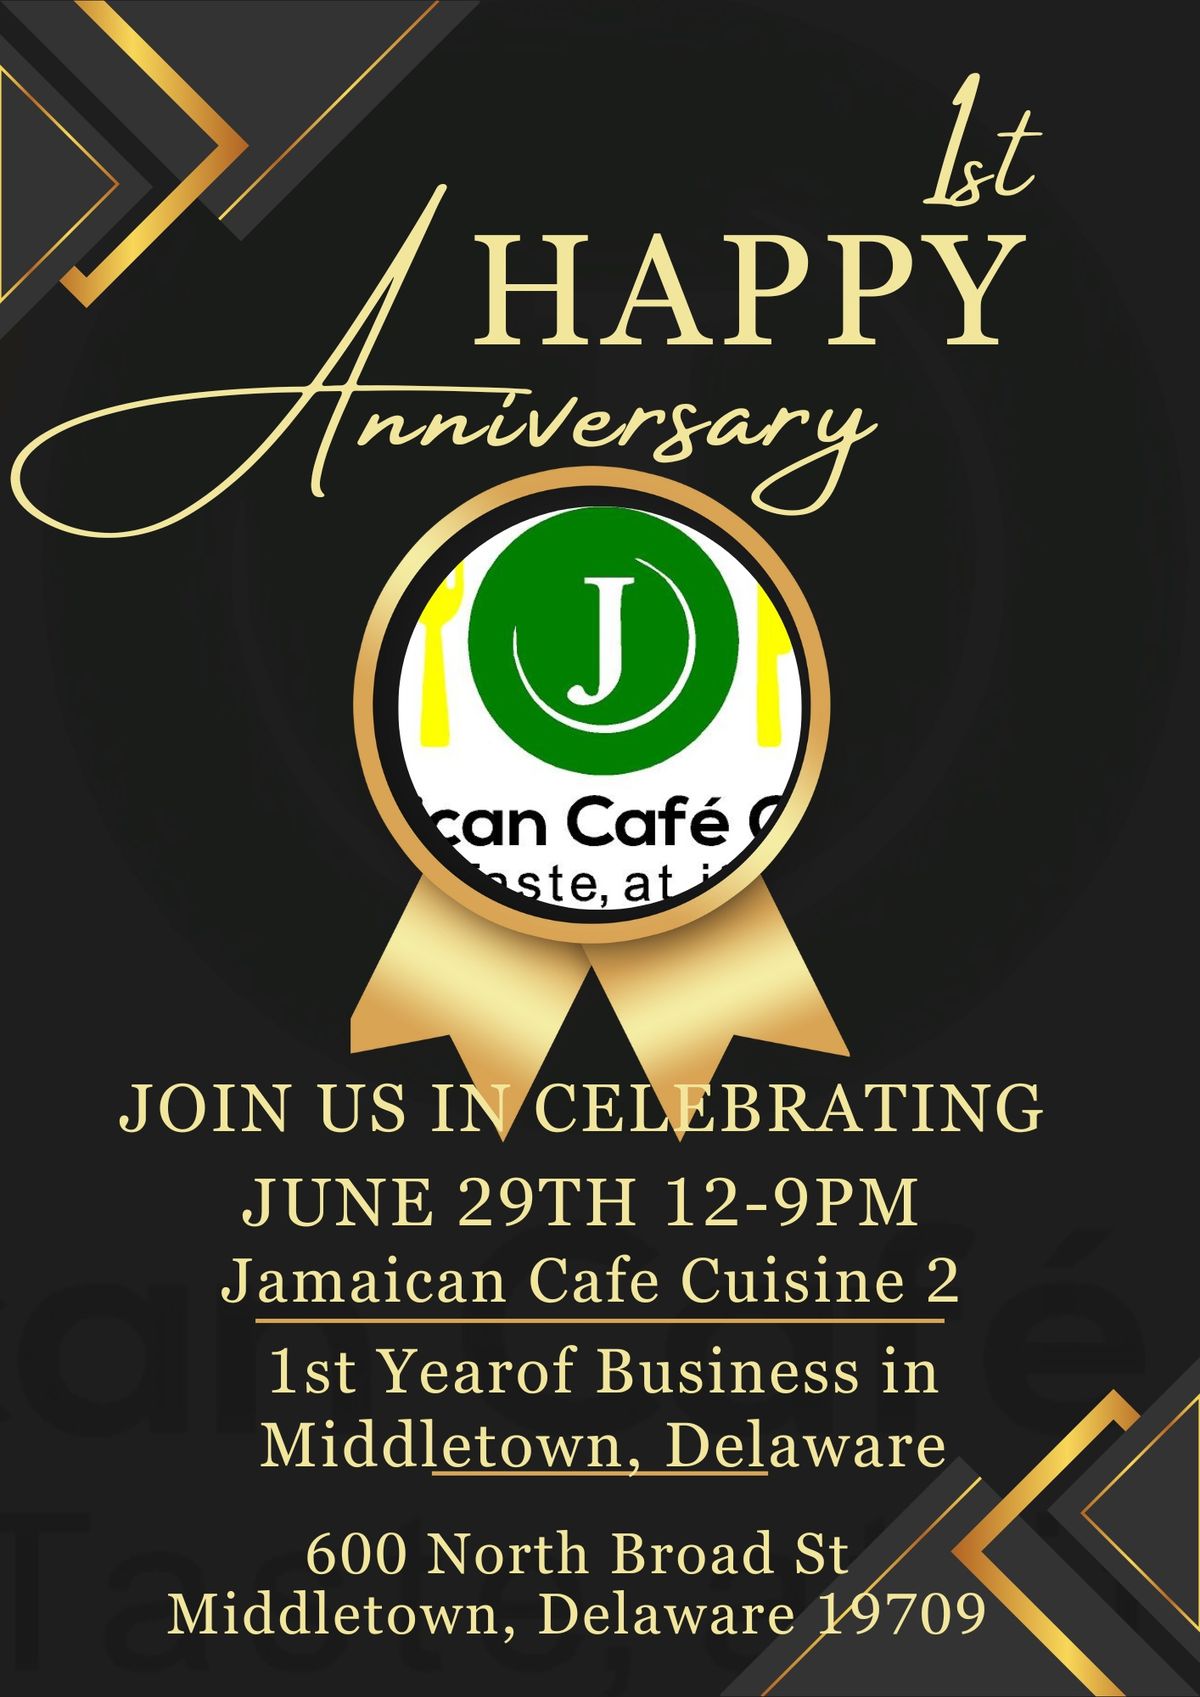 Jamaican Cafe Cuisine Middletown Anniversary Celebration